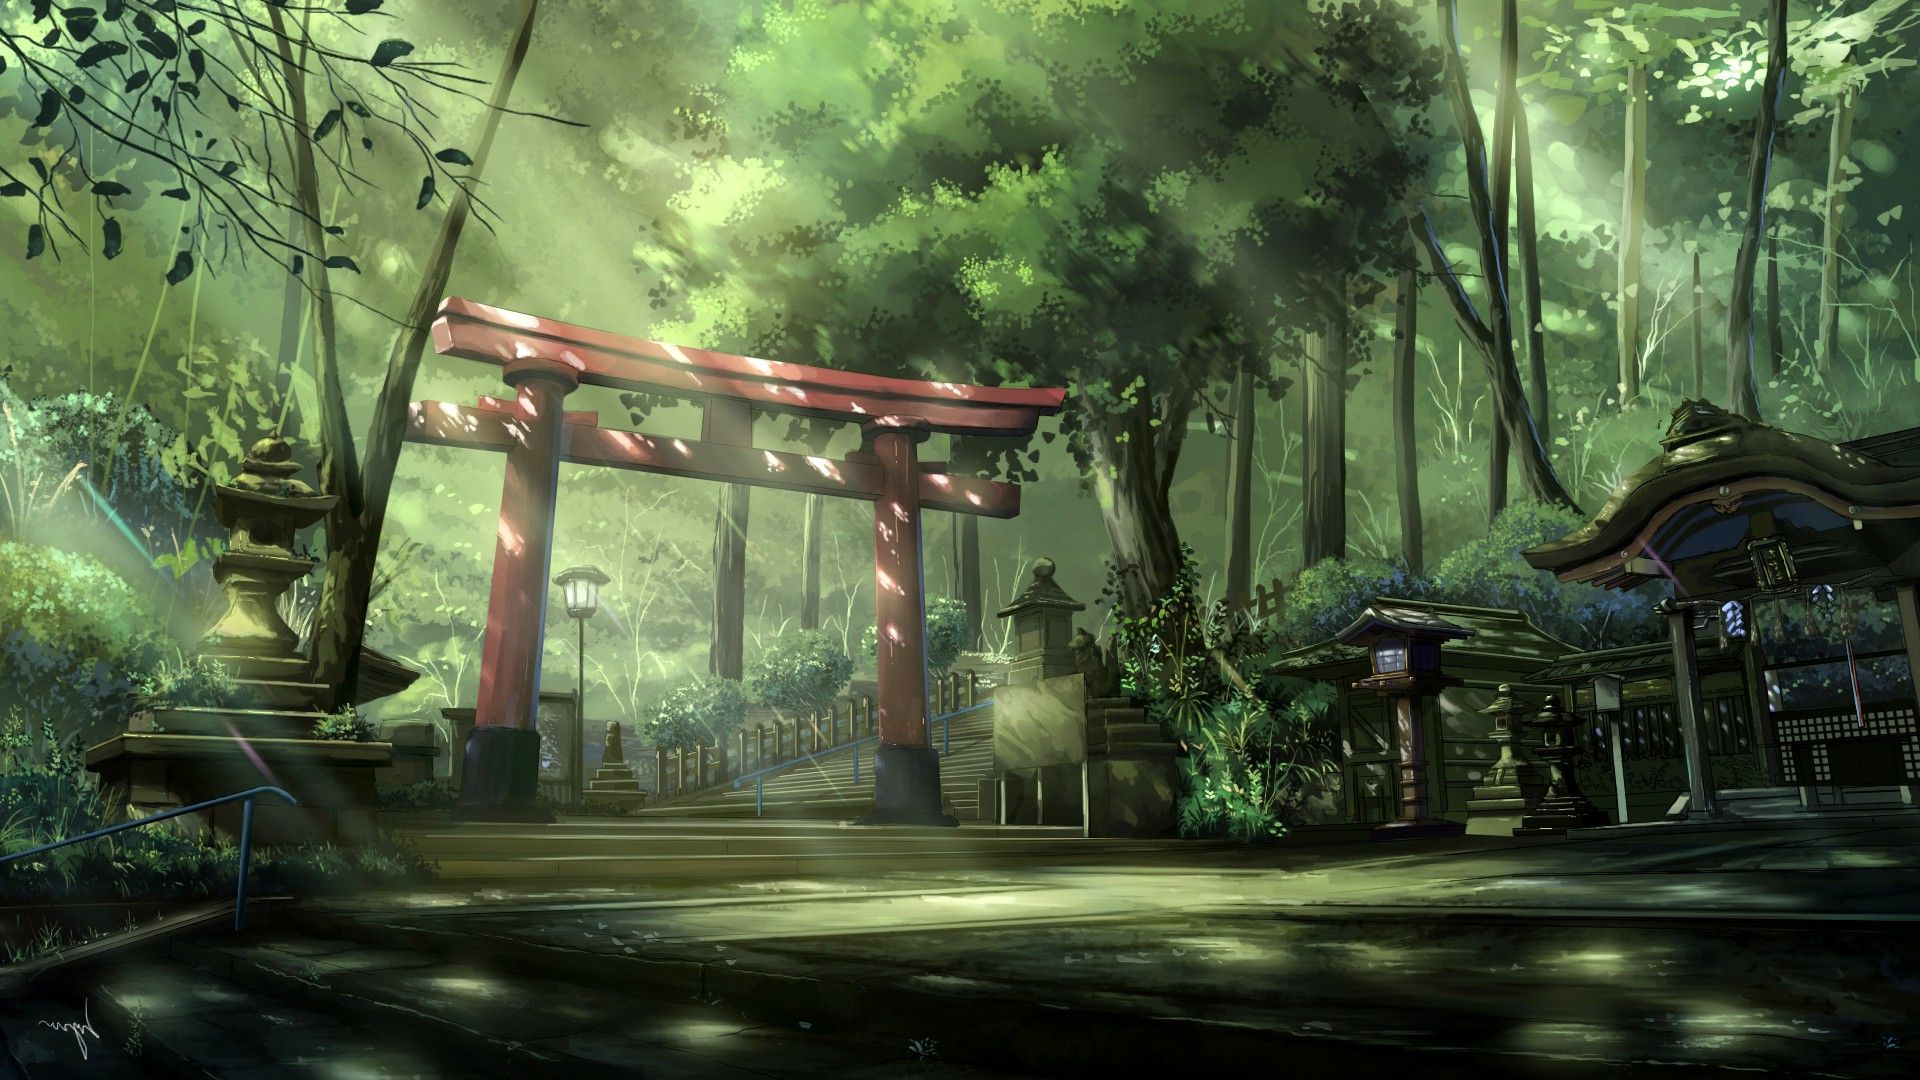 Wallpaper, trees, landscape, Asian architecture, anime, sun rays, torii, jungle, rainforest, steps, tree, screenshot, 1920x1080 px, bayou, computer wallpaper, pc game, biome, old growth forest, cg artwork, visual effects, environmental art